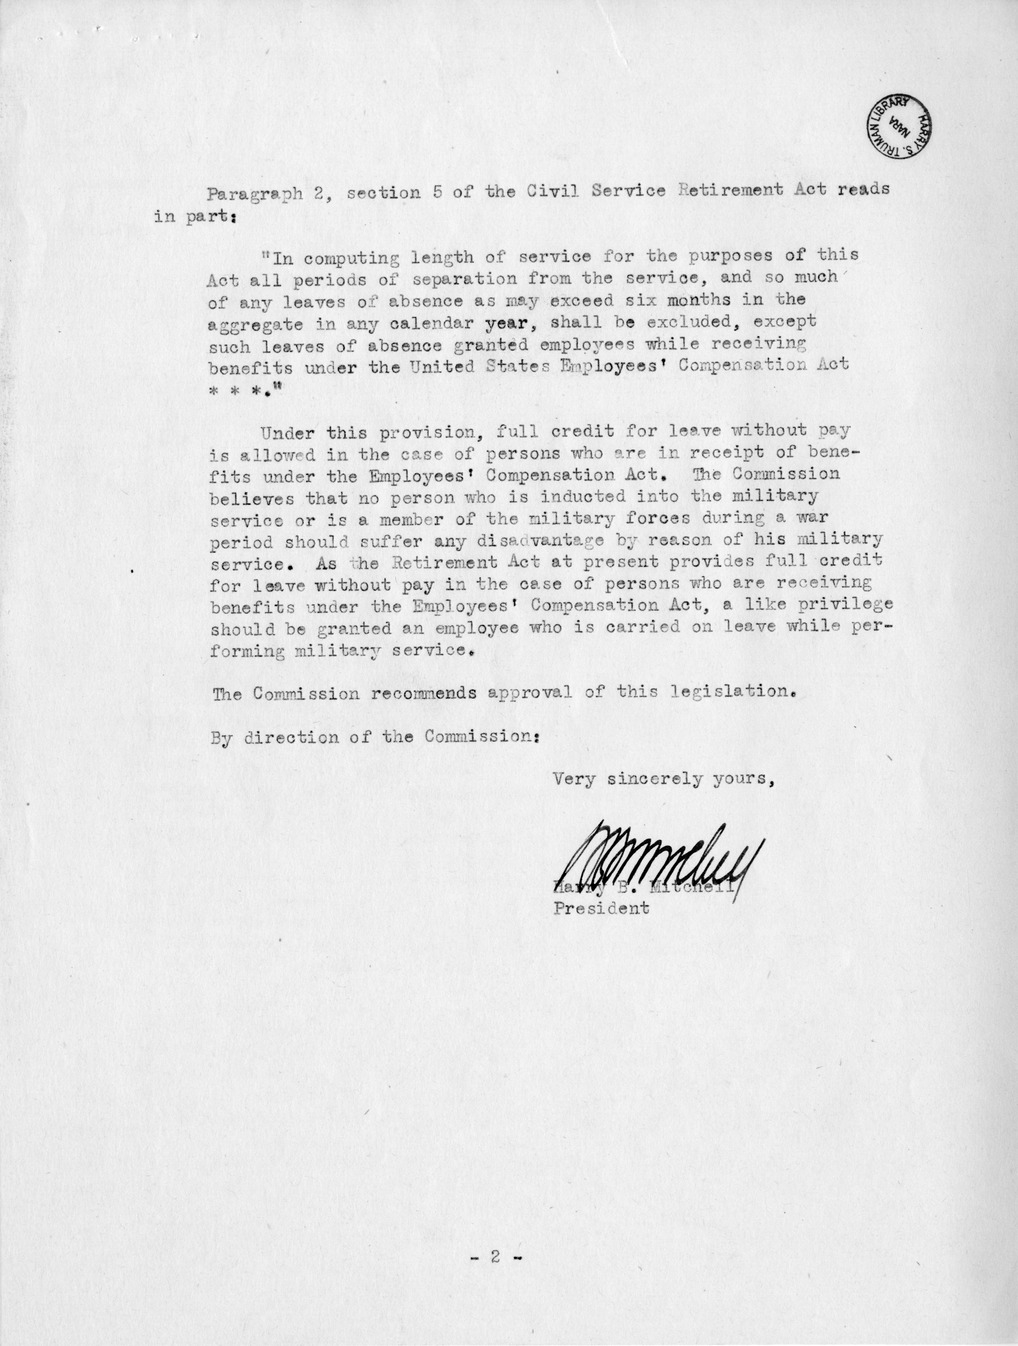 Memorandum from Harold D. Smith to M. C. Latta, S. 405, To Amend Further the Civil Service Retirement Act Approved May 29, 1930, as Amended, with Attachments